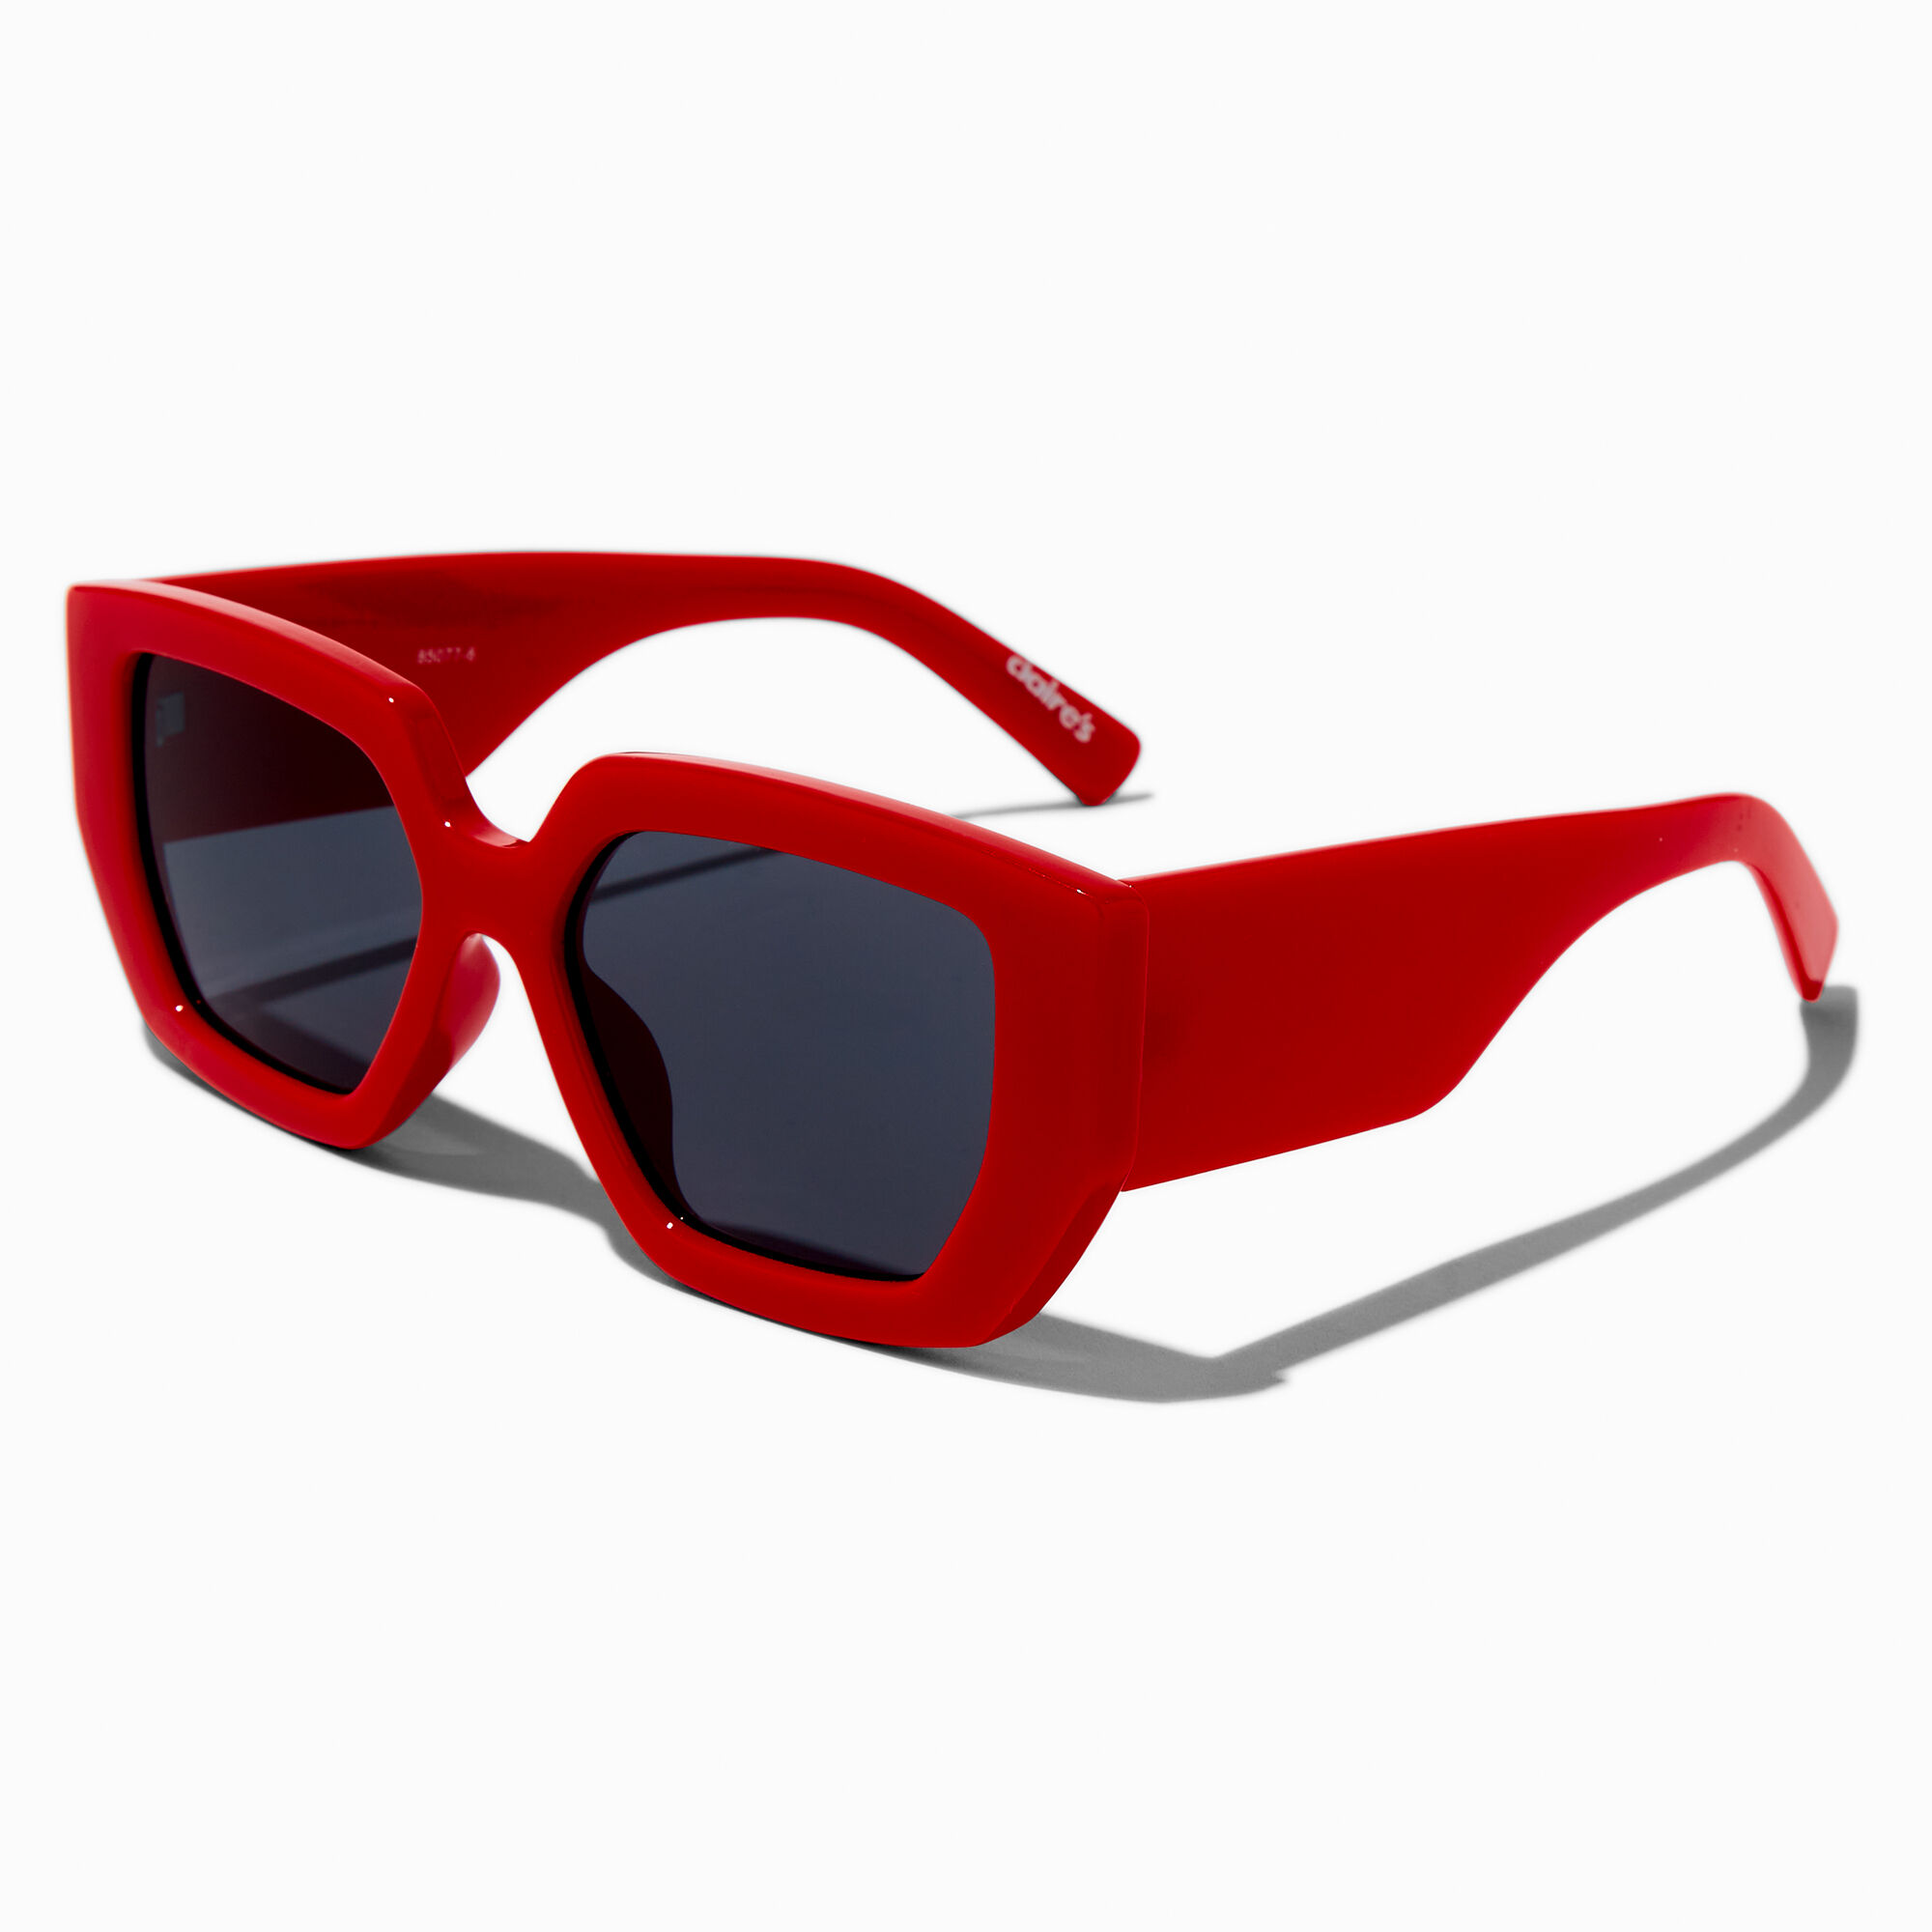 View Claires Chunky Geometric Sunglasses Red information